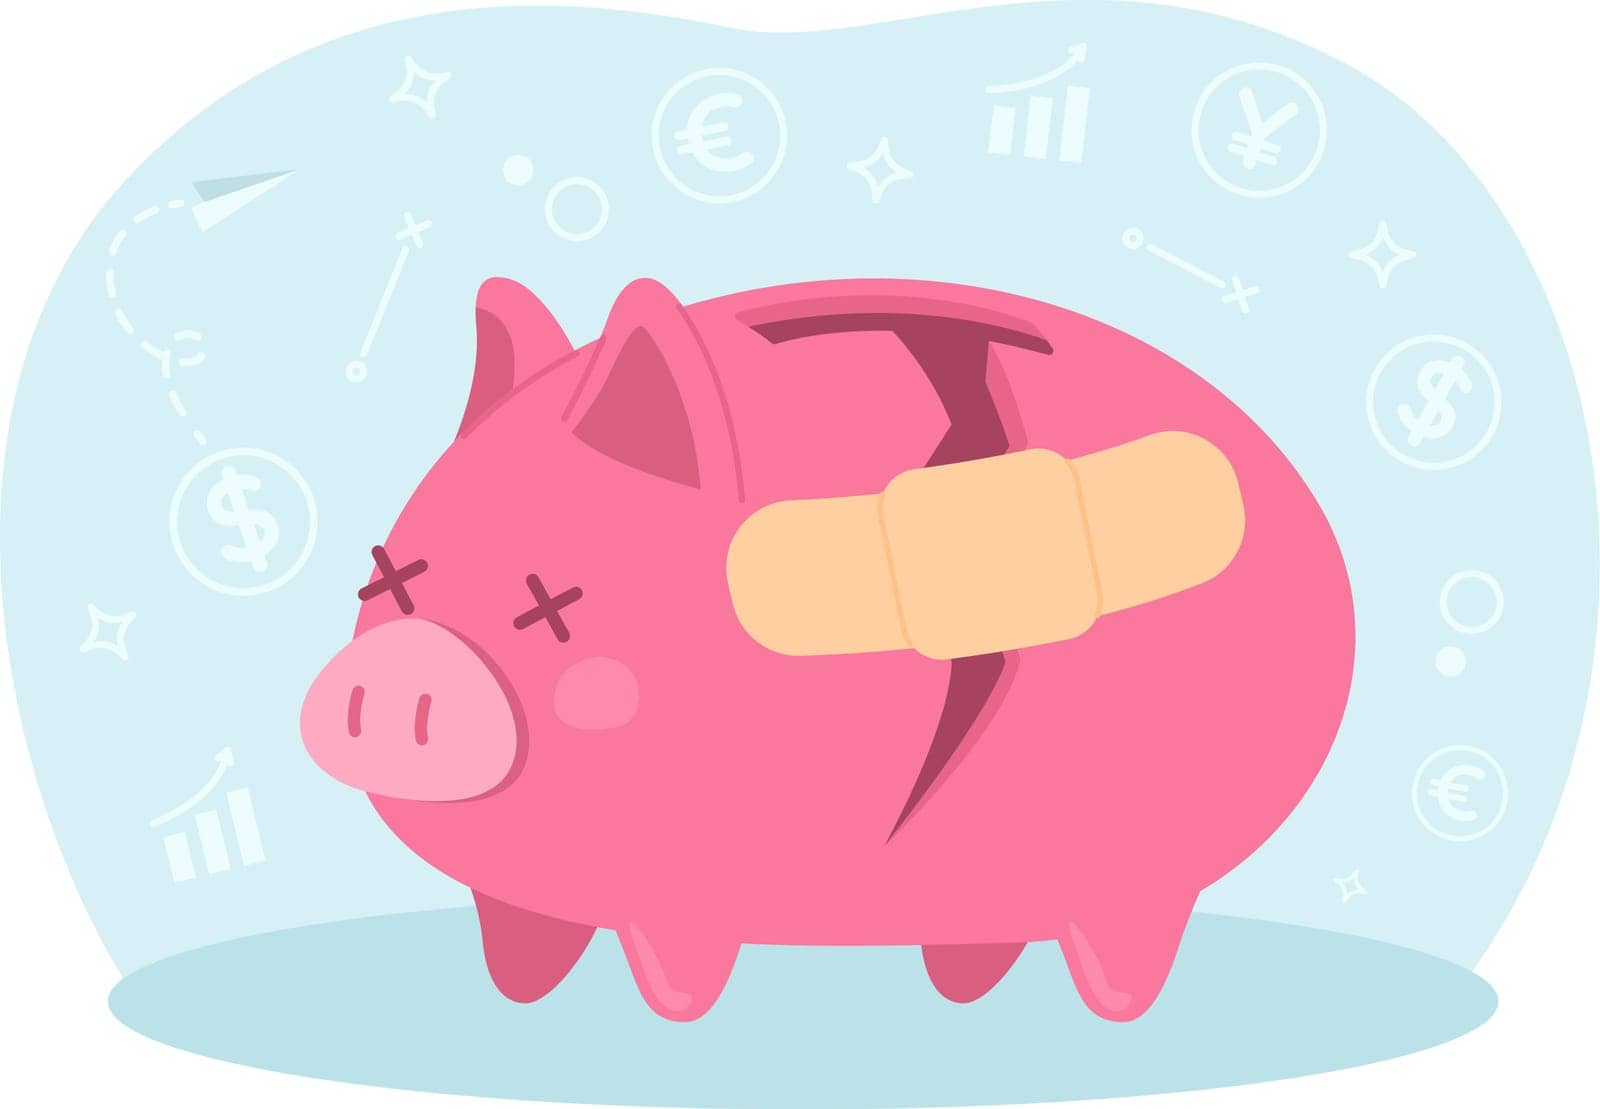 Fixing shattered piggy bank 2D vector isolated spot illustration. Managing money better. Tracking budget flat object on cartoon background. Colorful editable scene for mobile, website, magazine